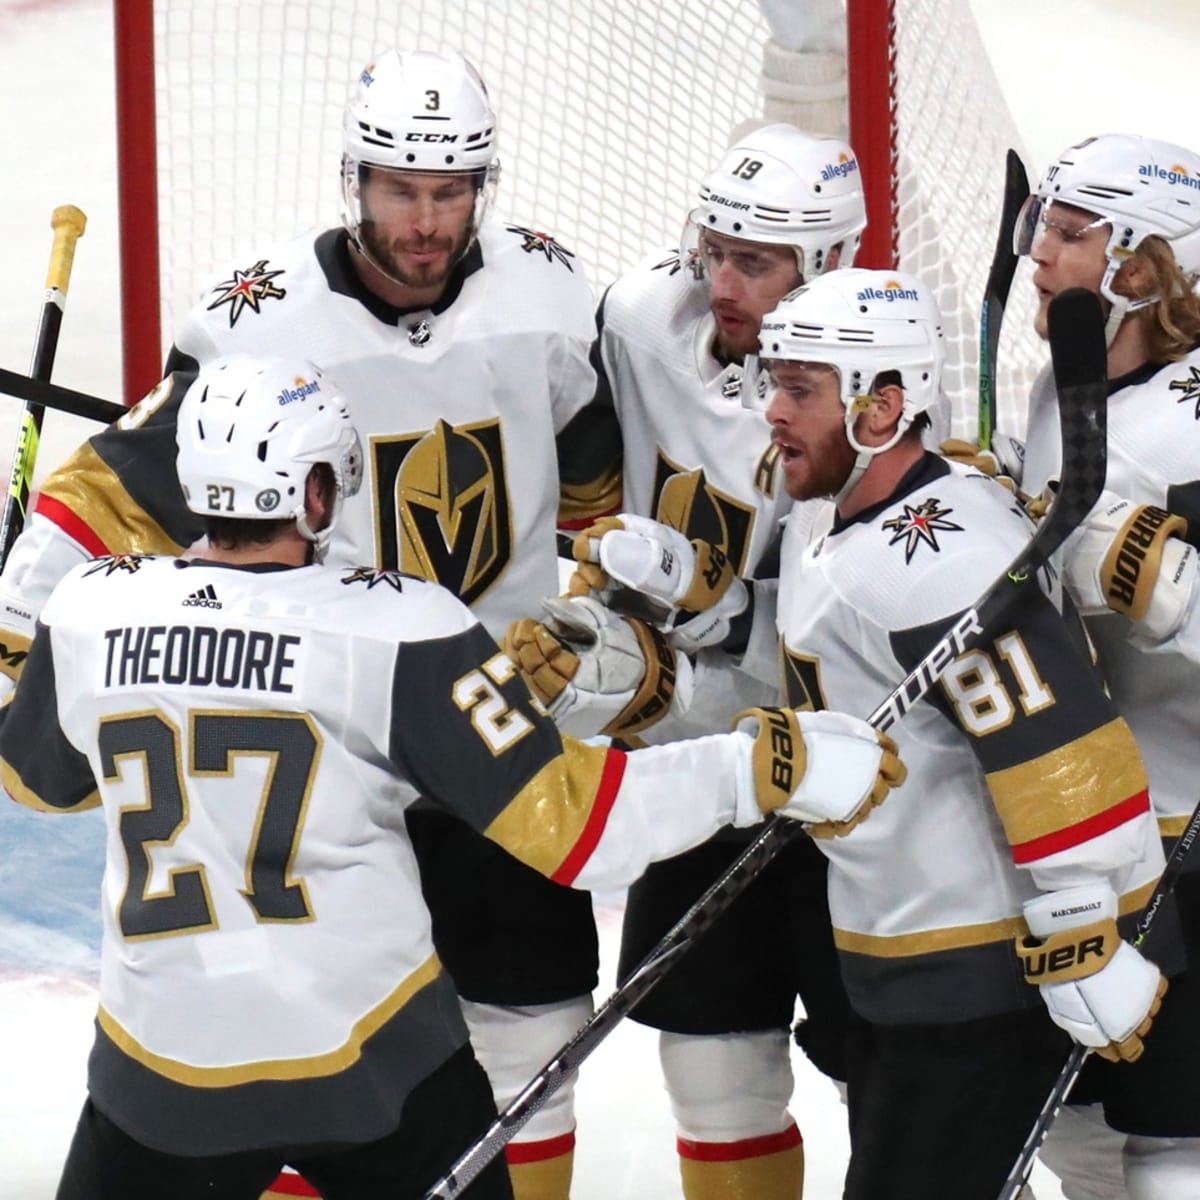 Vegas Golden Knights: Expectations For The 2017-18 Season